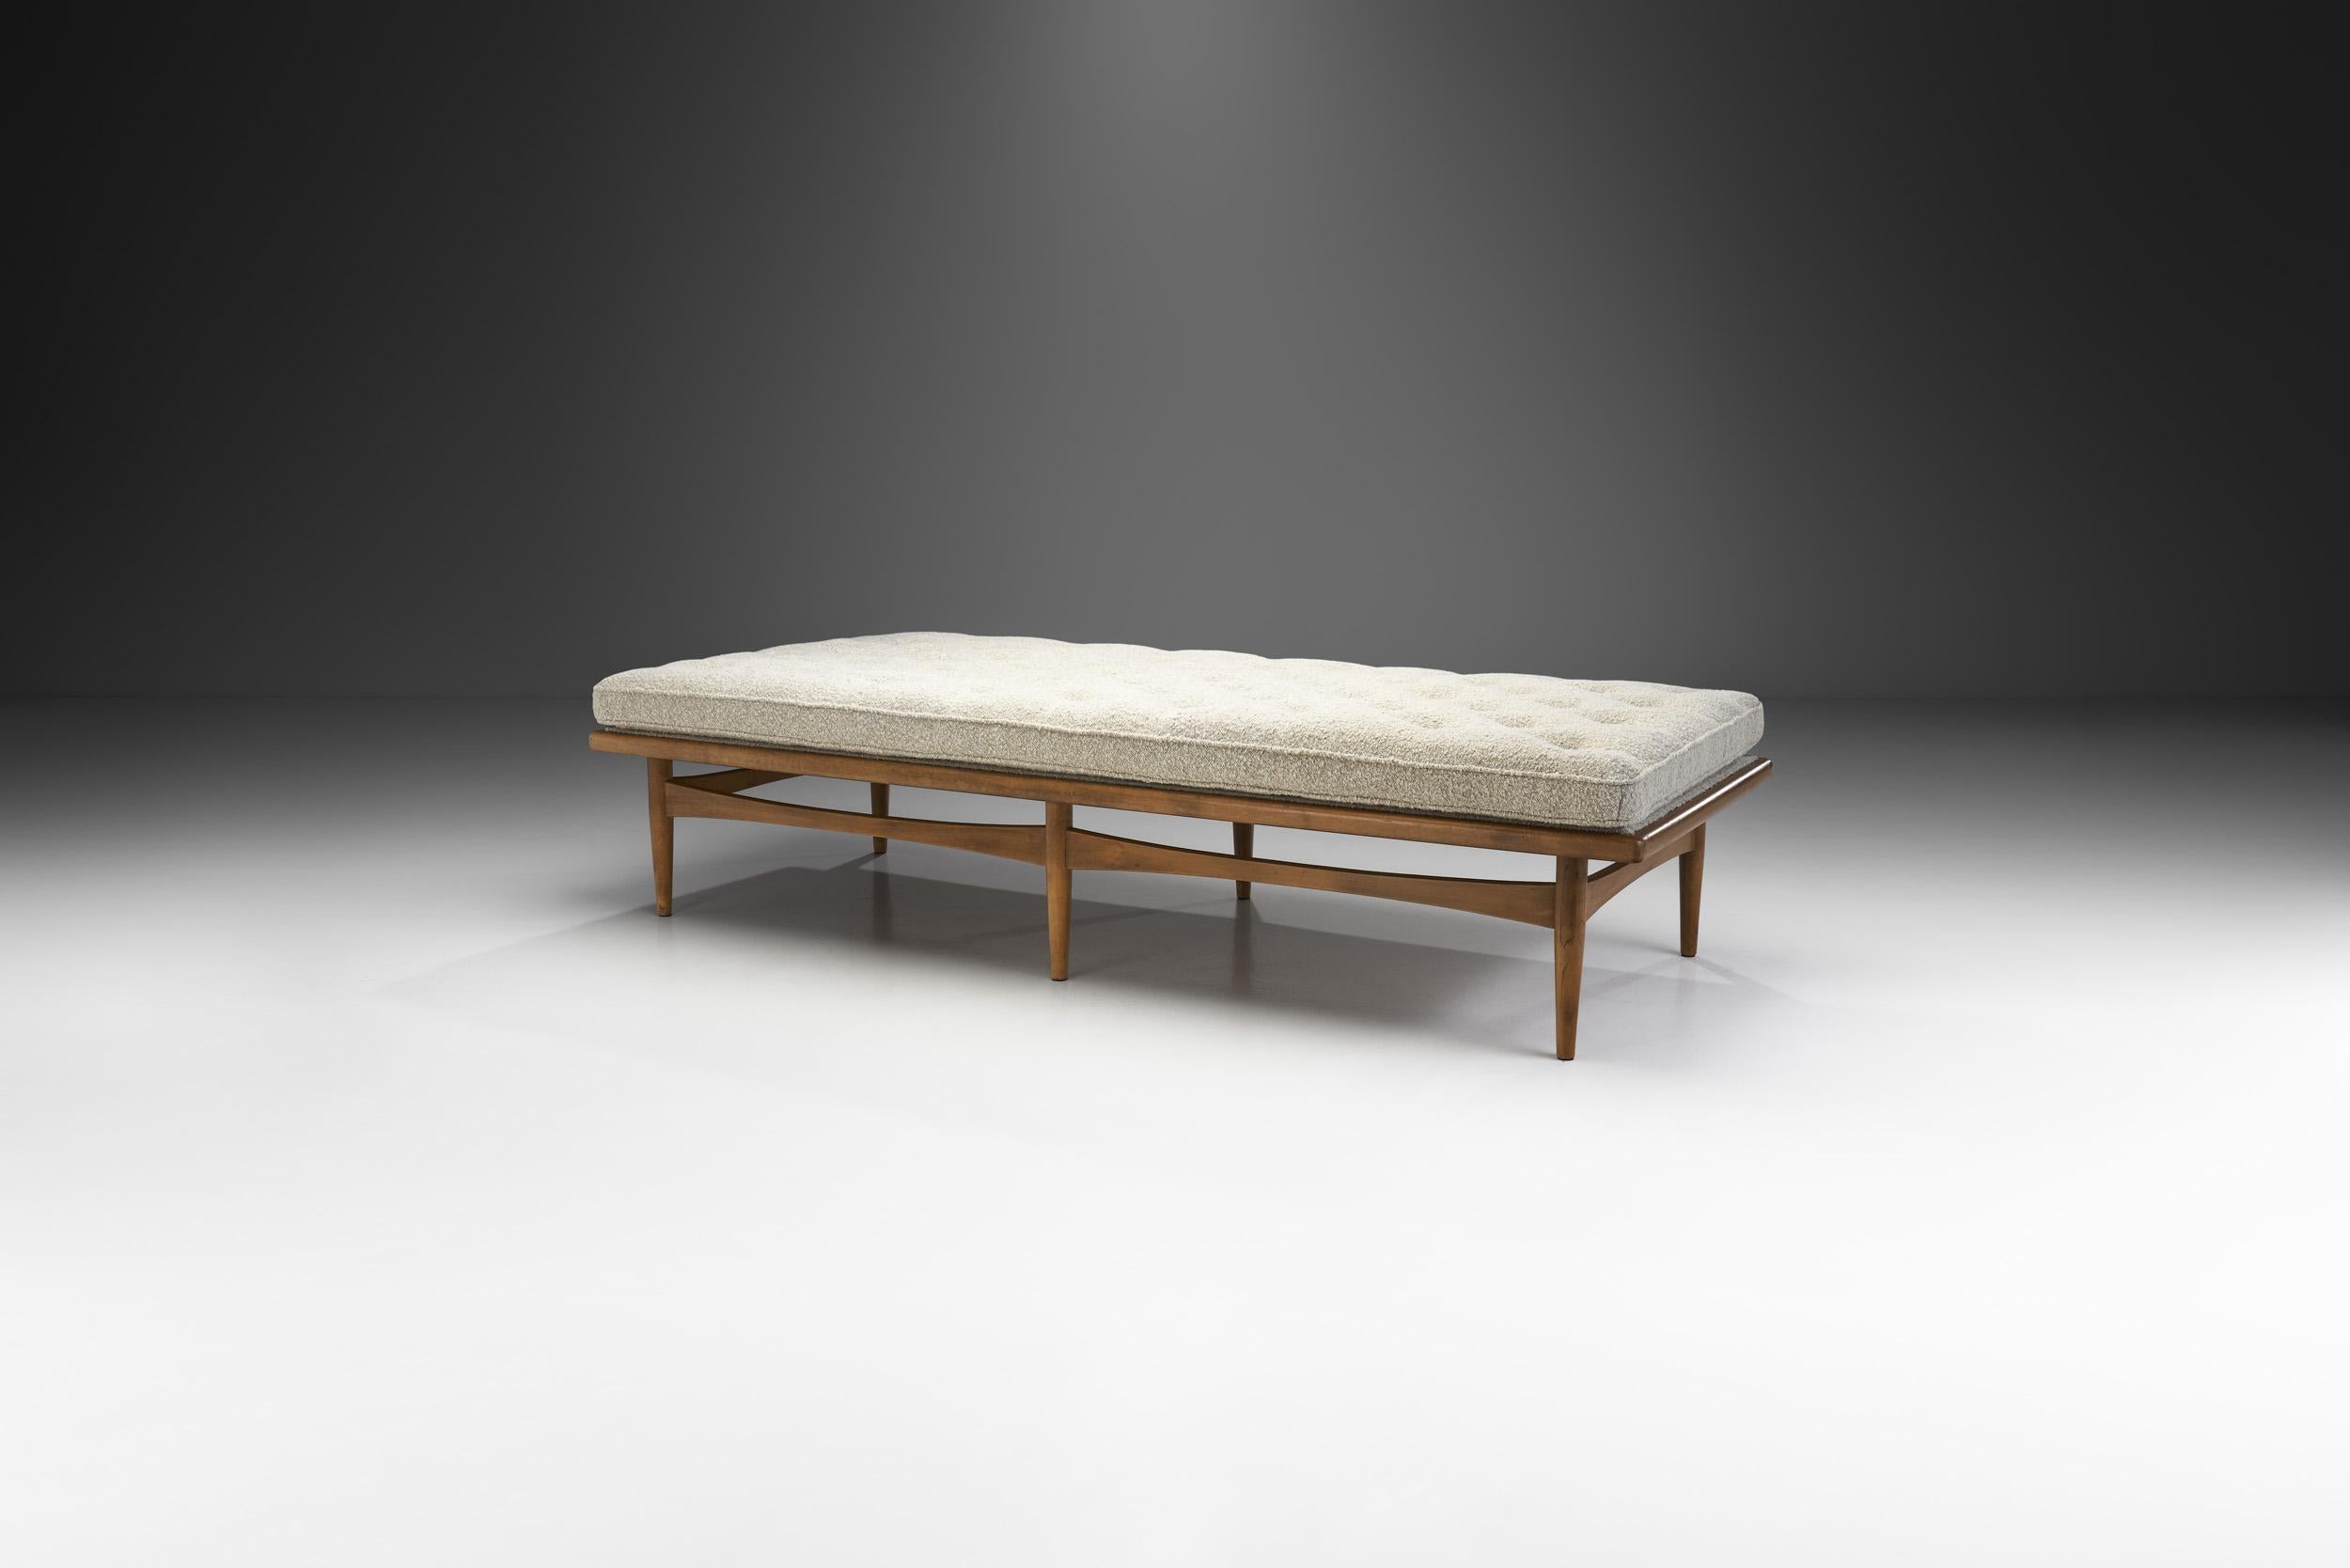 Swedish Mid-Century Daybed with Mattress by Möbelproduktion AB, Sweden, ca 1950s